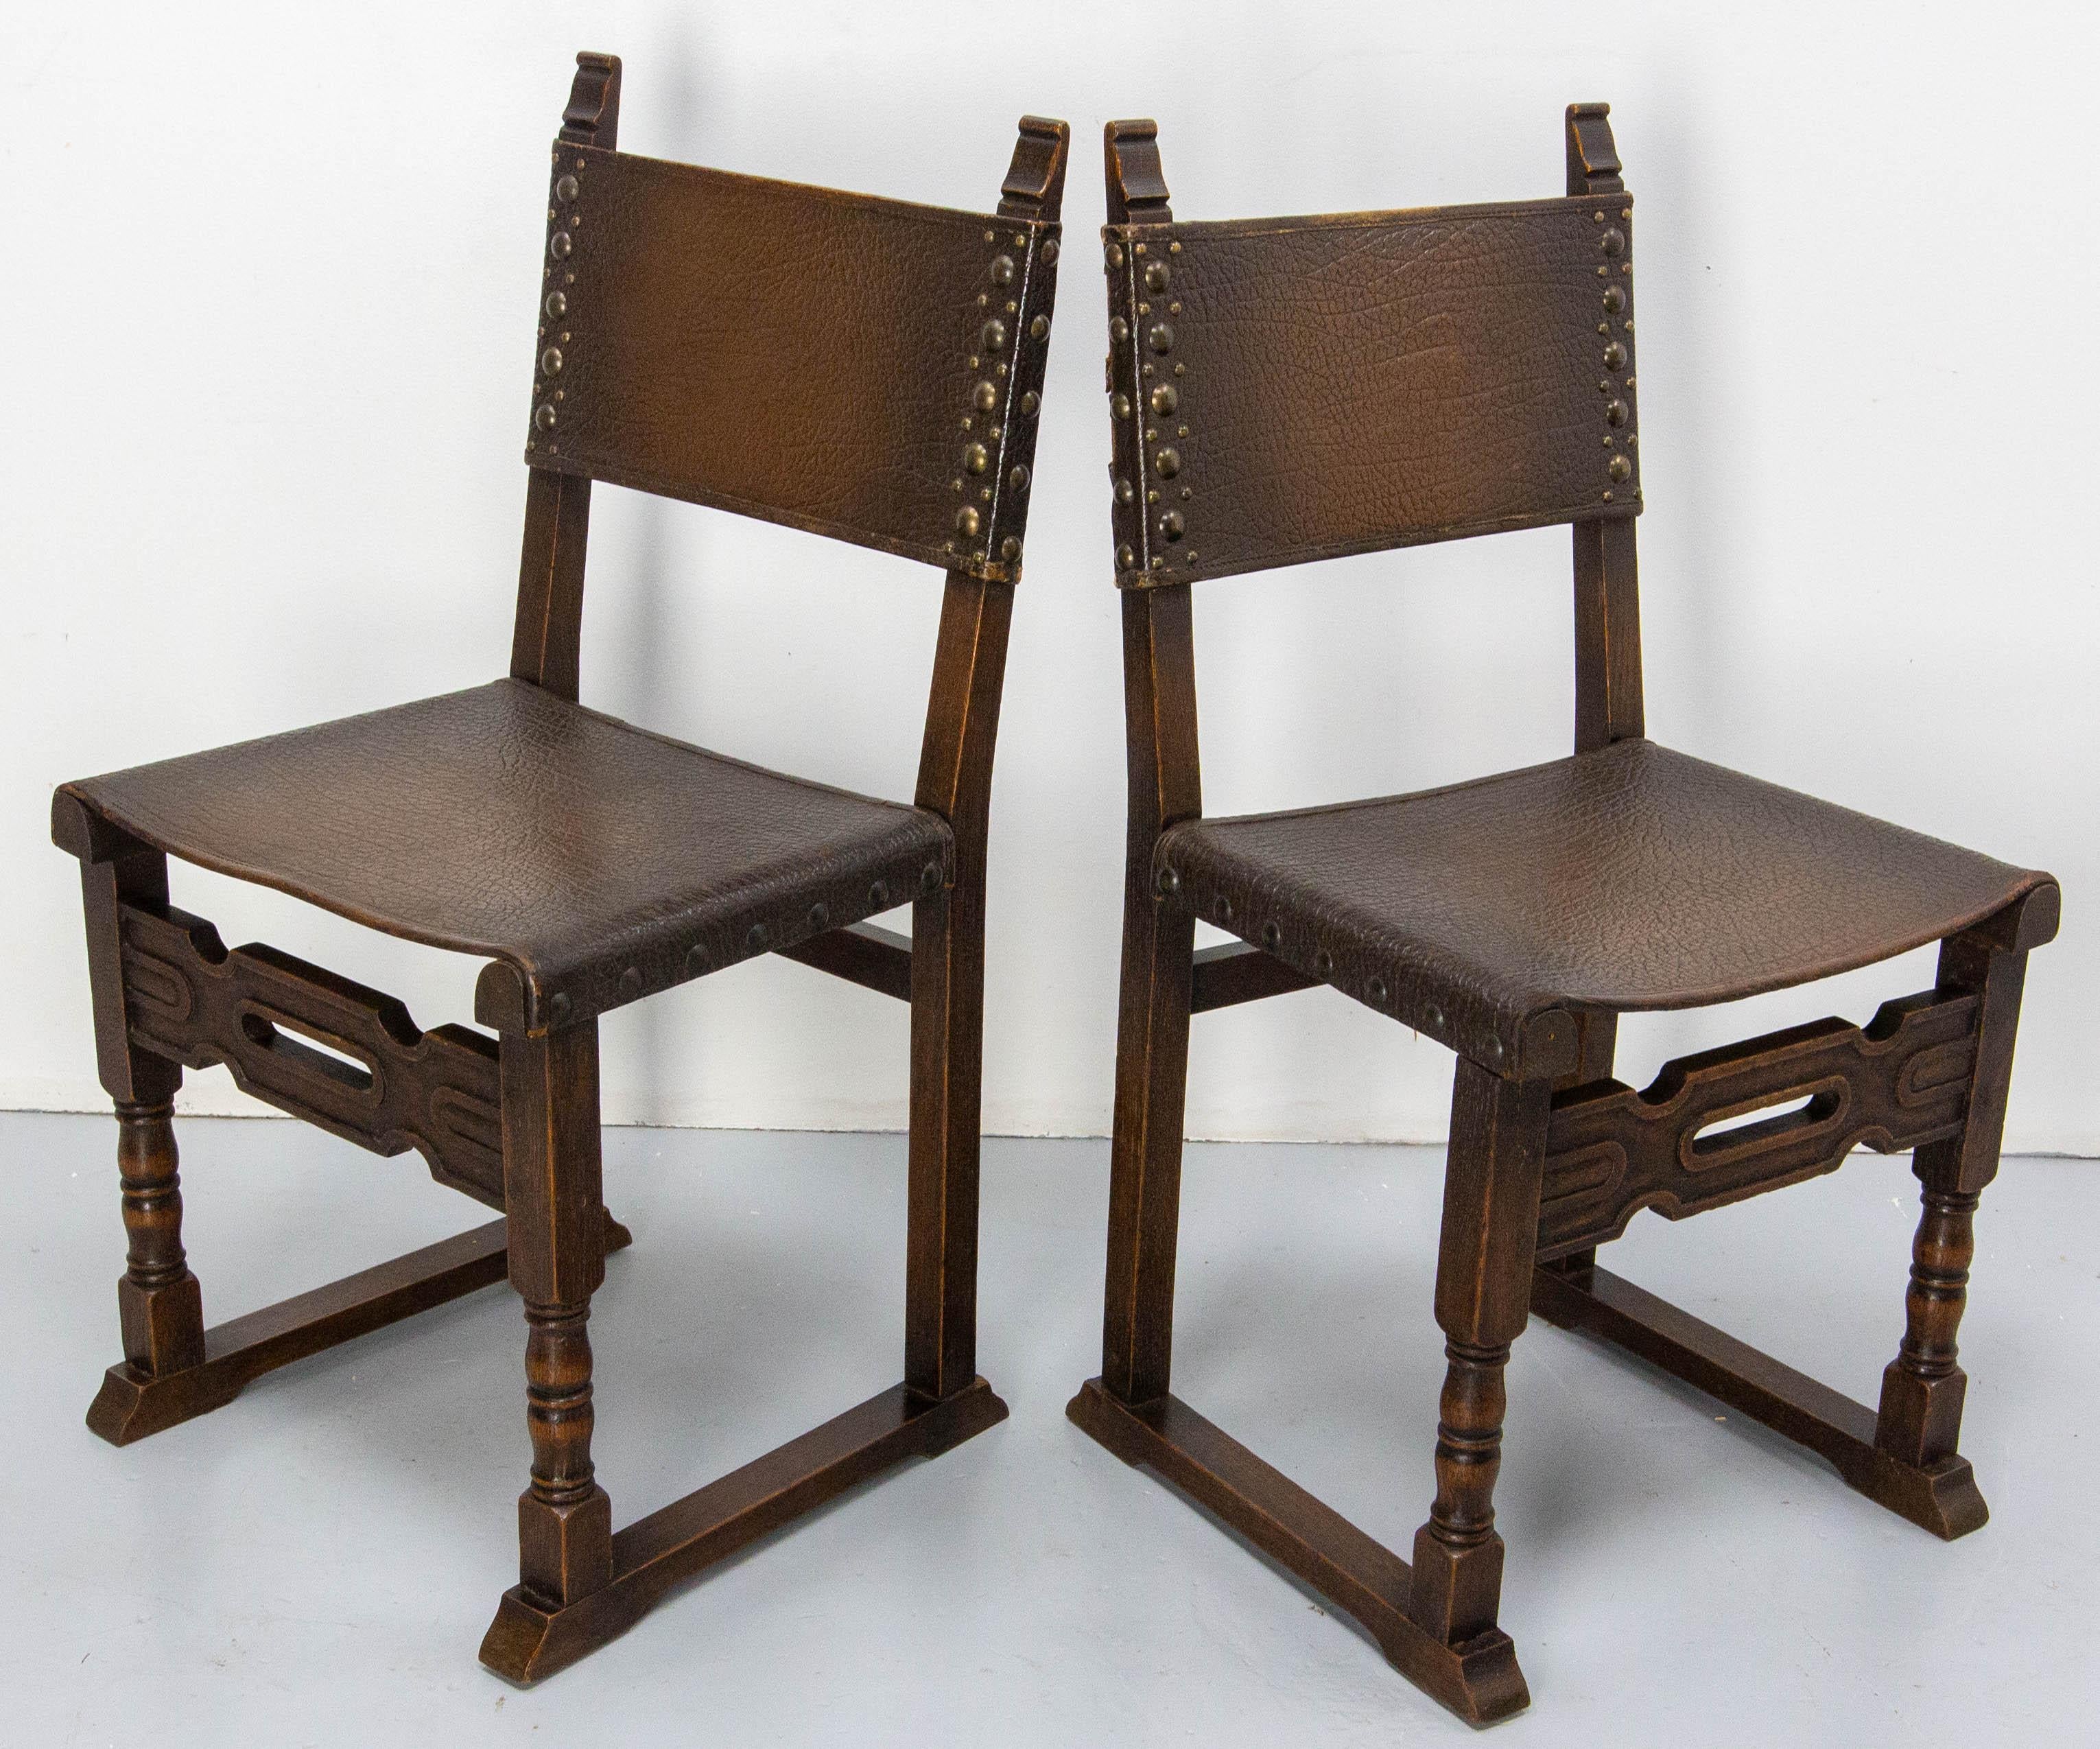 Six Dining Chairs Antique Mid-20th Century Spanish Studs Leather & Chestnut 2